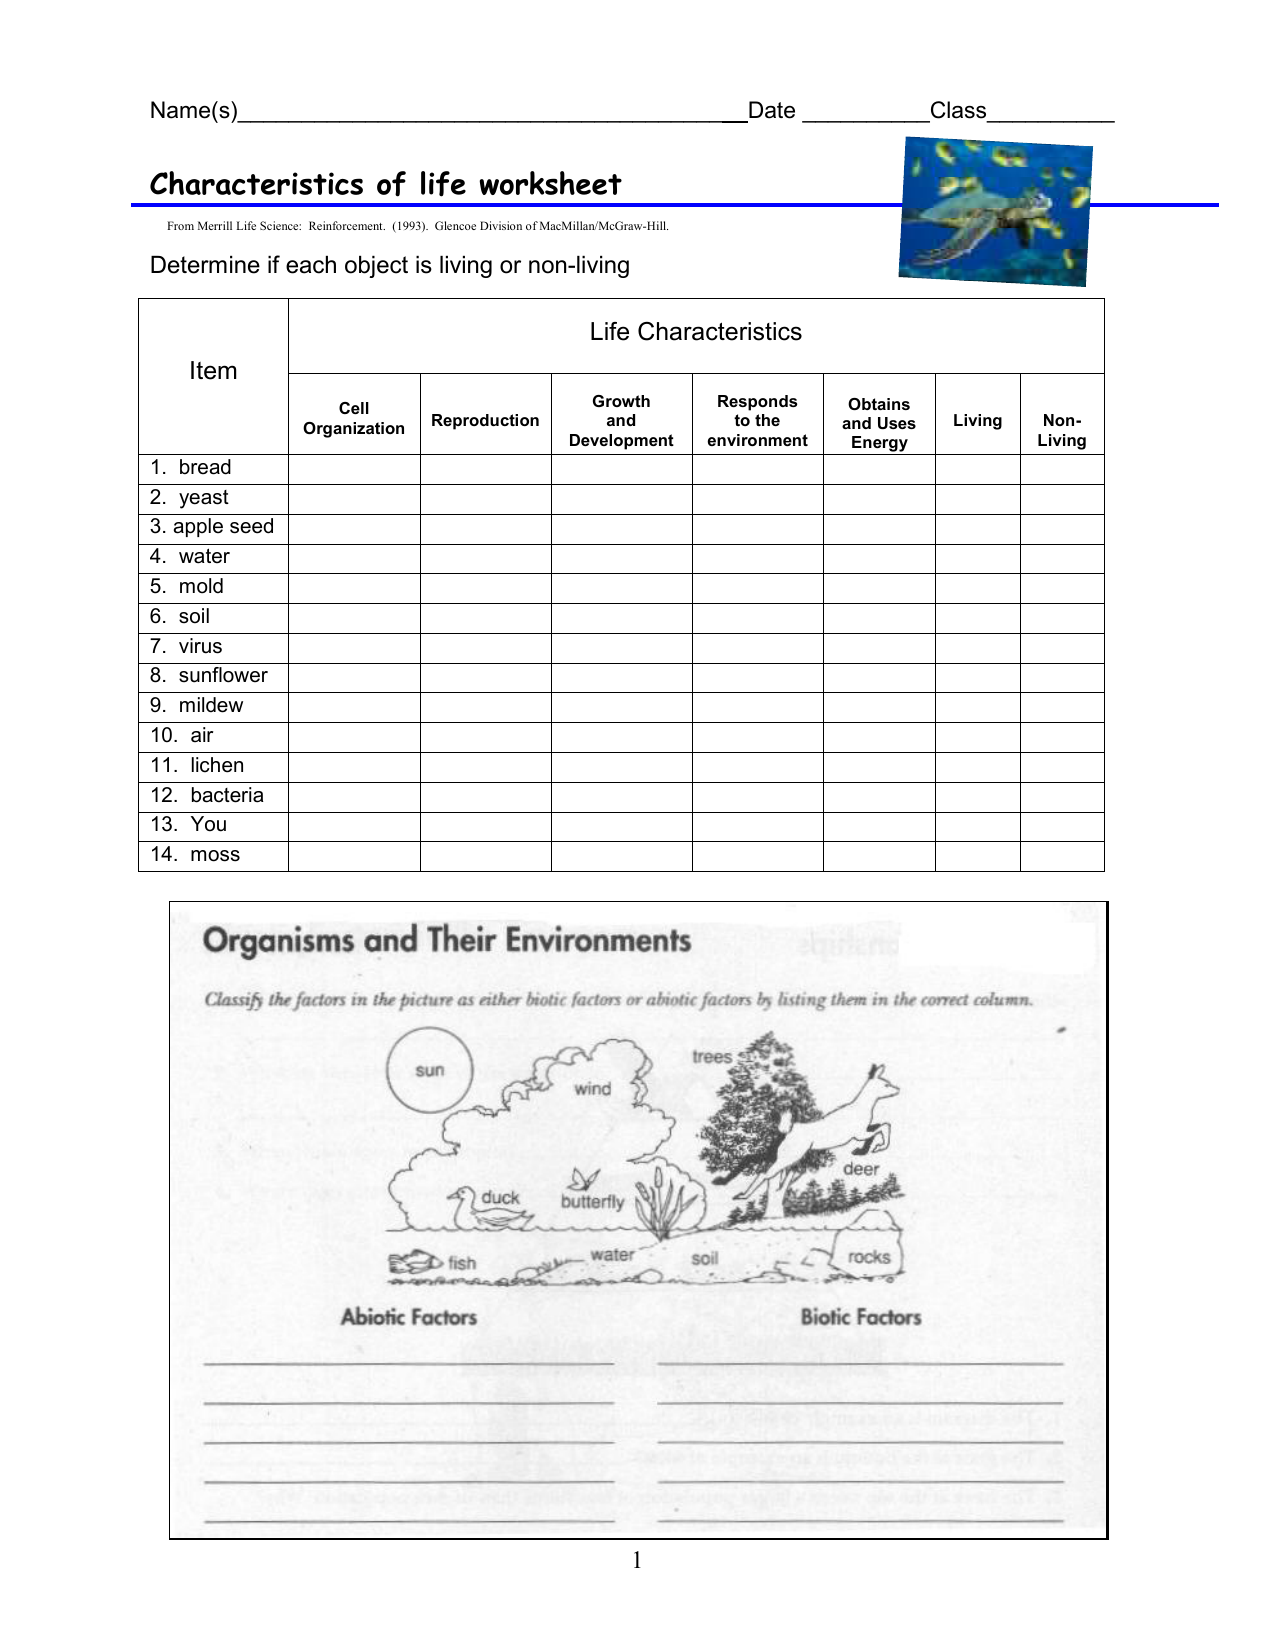 Characteristics of life worksheet Throughout Characteristics Of Life Worksheet